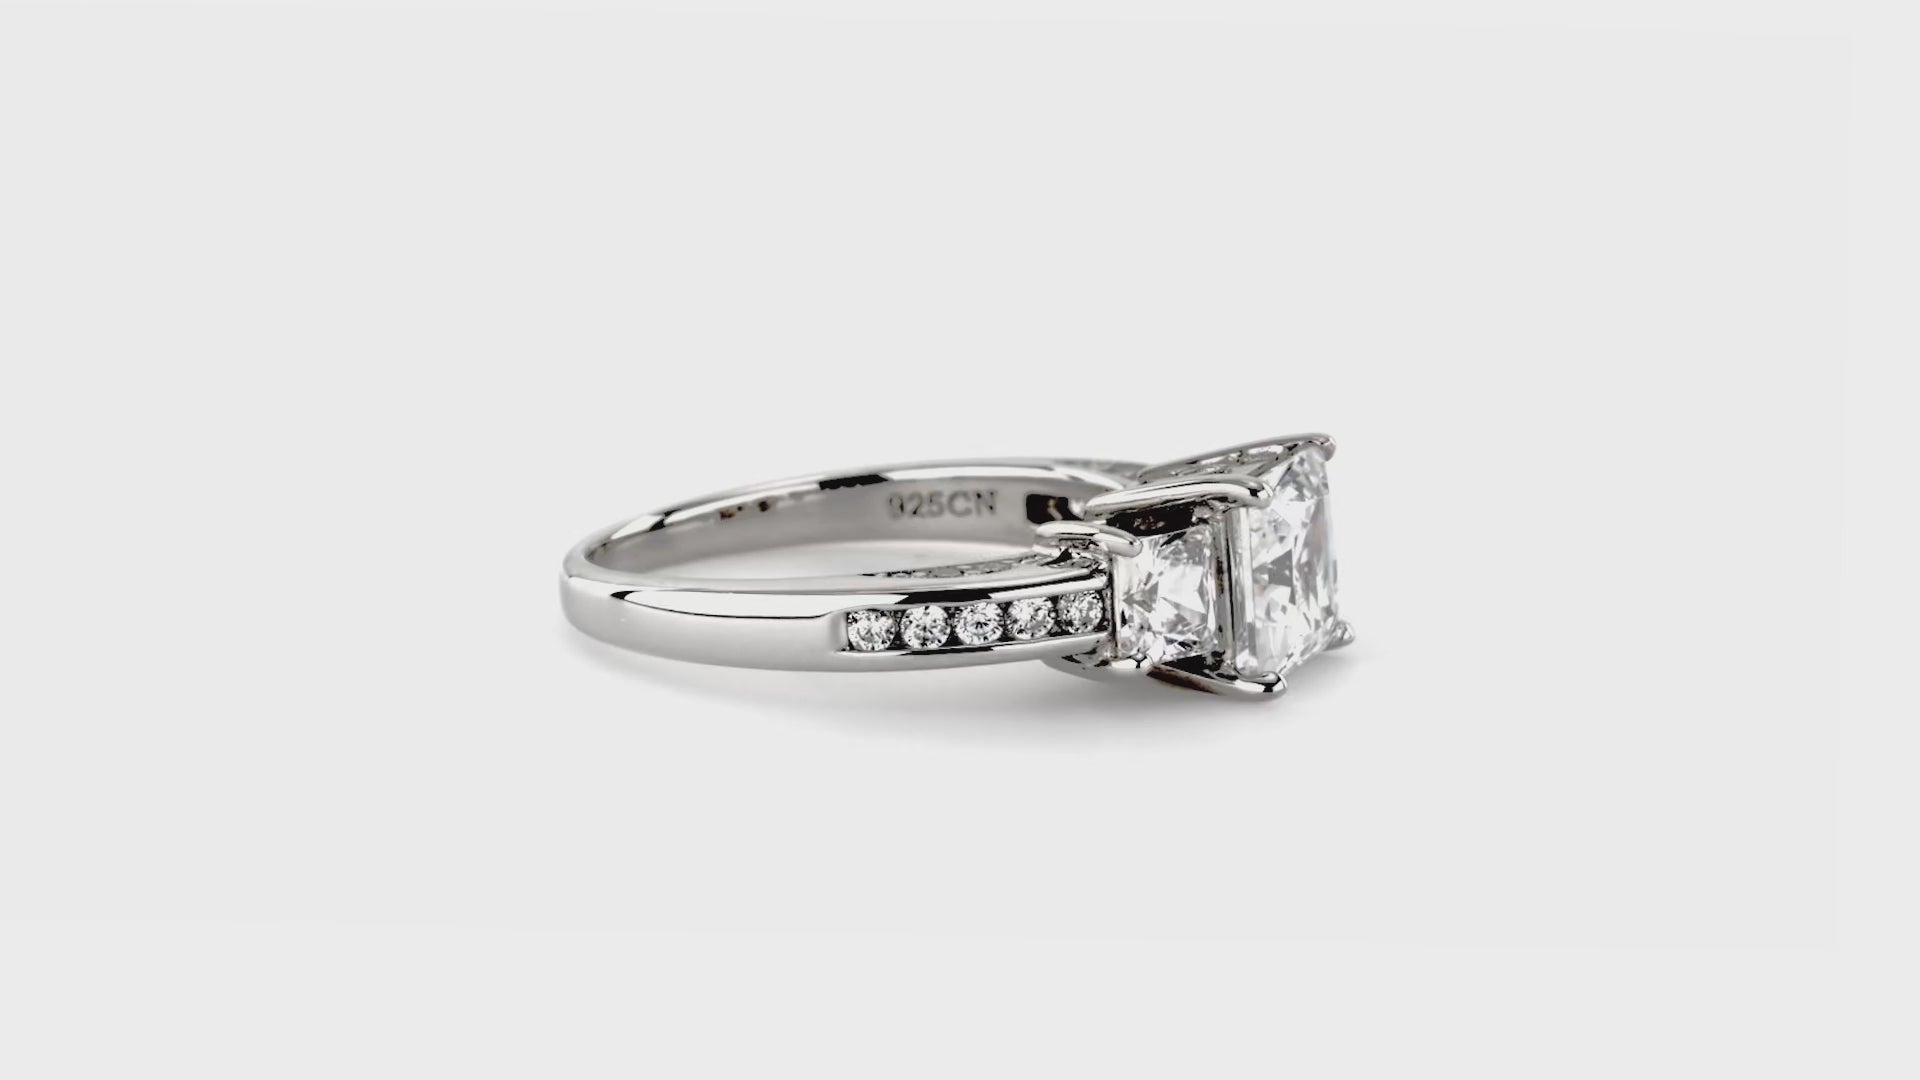 Video Contains 3-Stone Princess CZ Ring Set in Sterling Silver. Style Number VR454-01